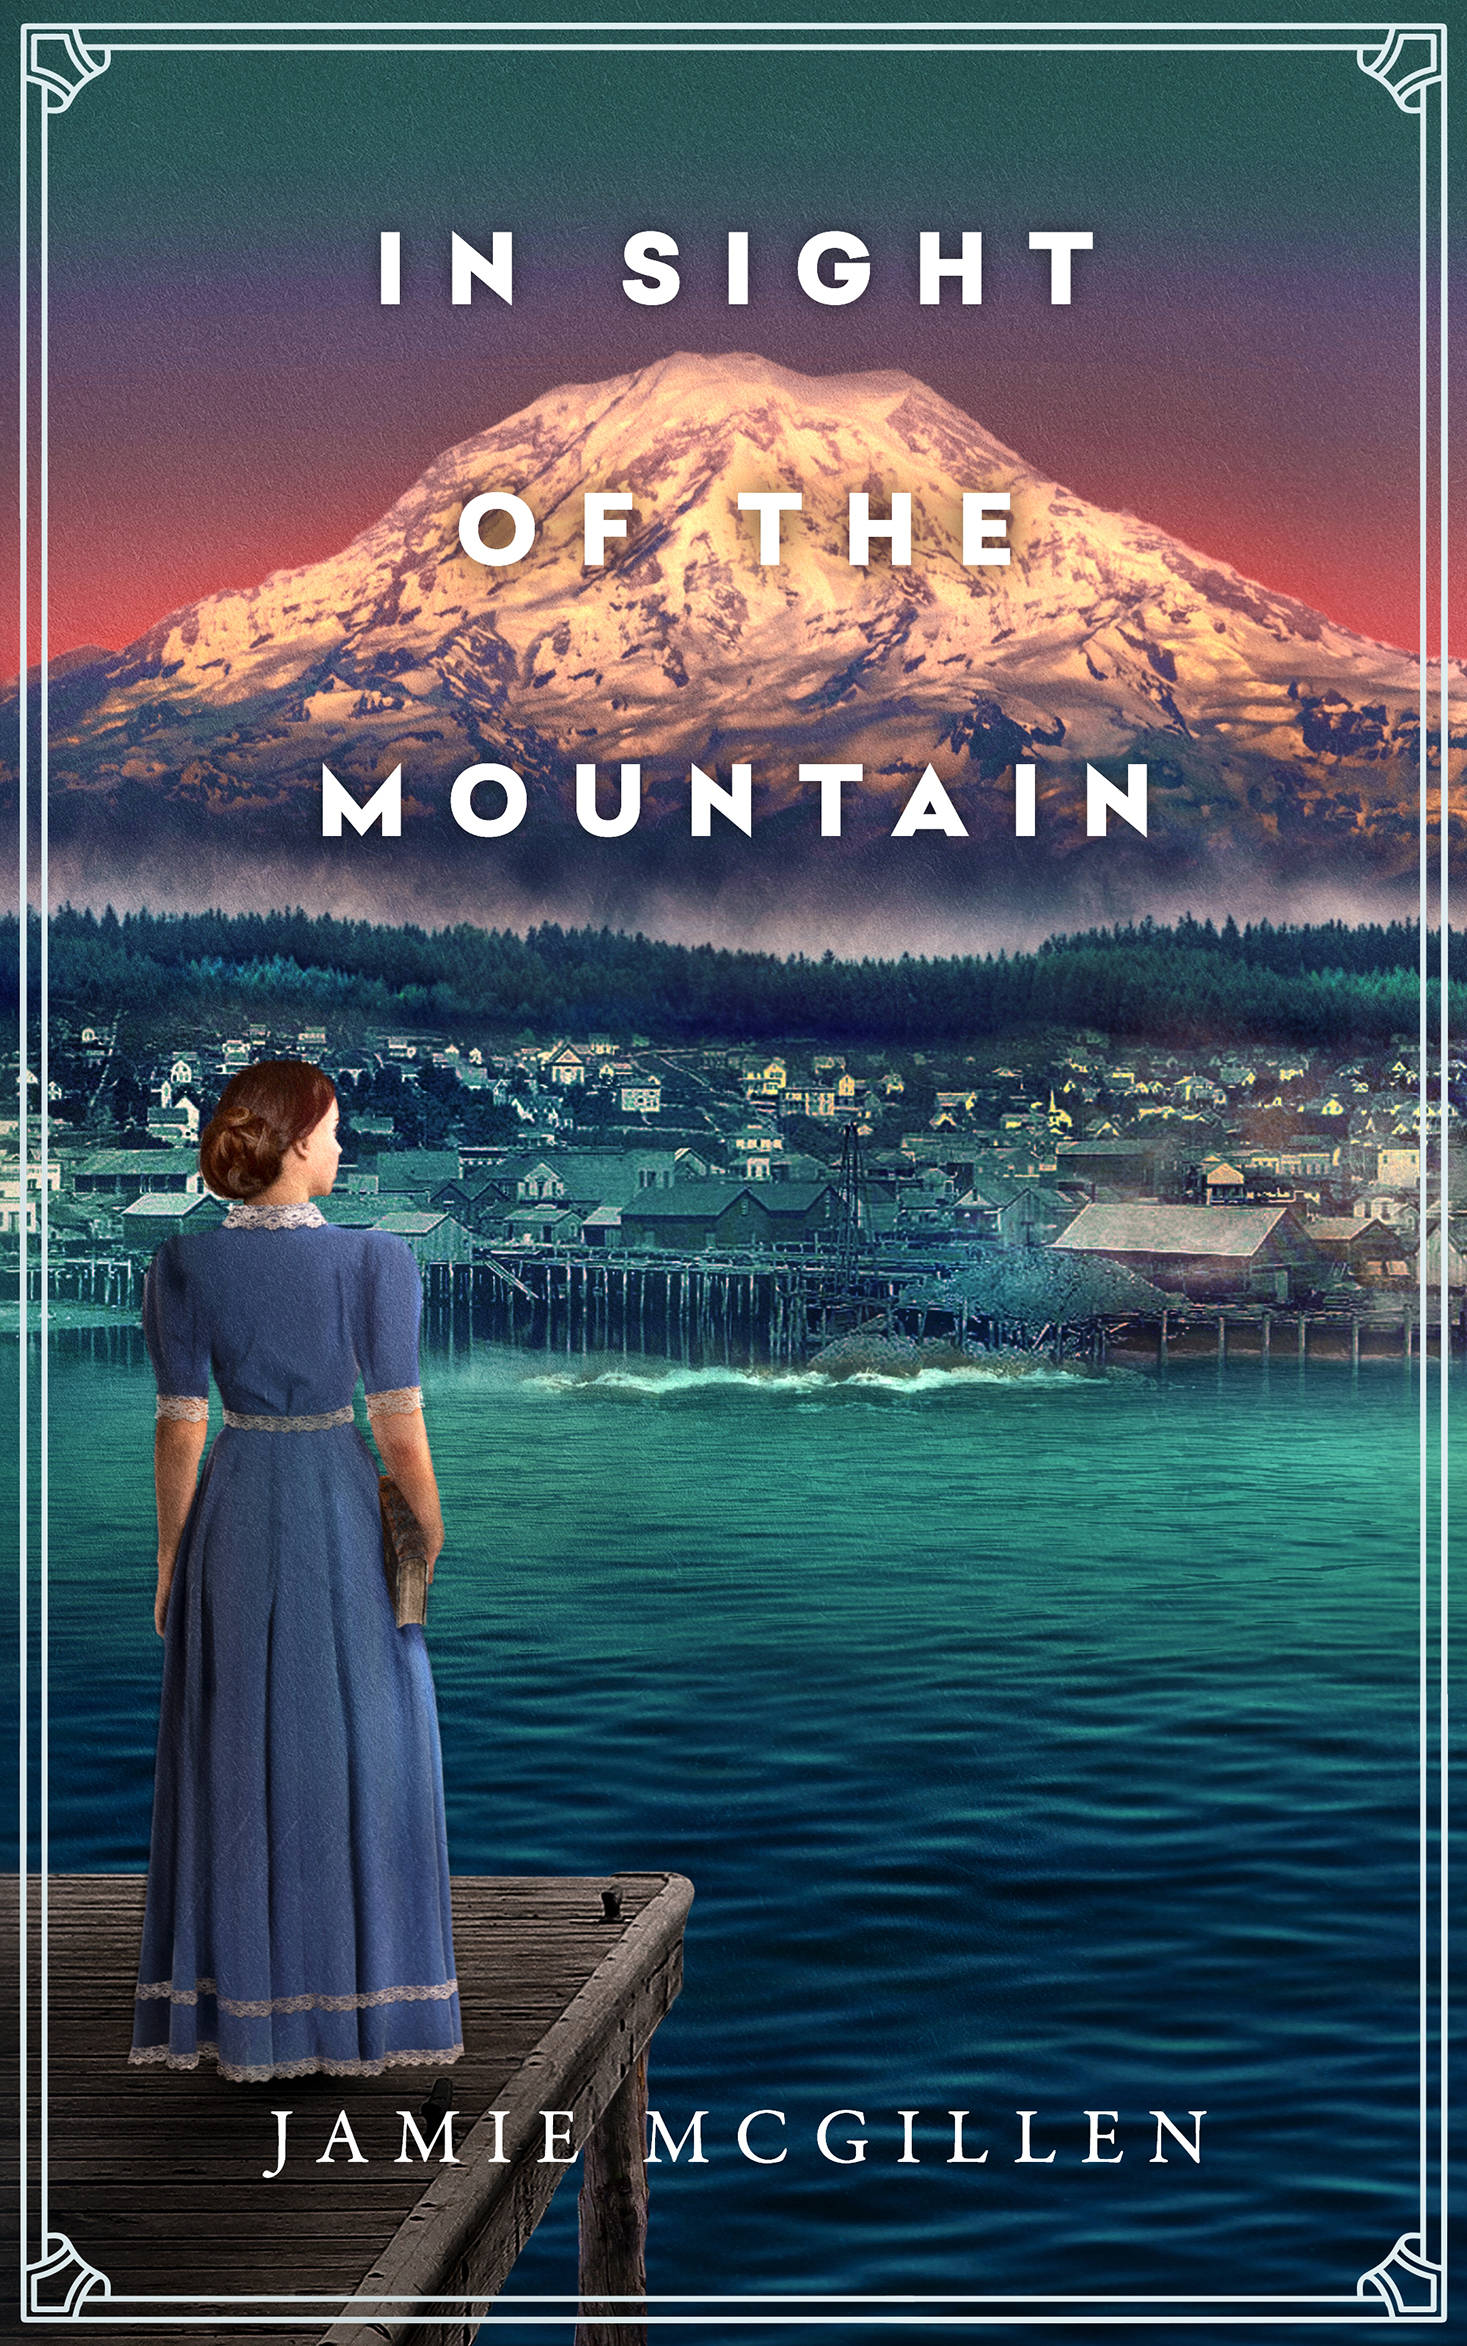 “In Sight of the Mountain” is the debut novel of author Jamie McGillen, who was born in Juneau and now lives in Washington state. It was published in September. (Courtesy Photo | Jamie McGillen)